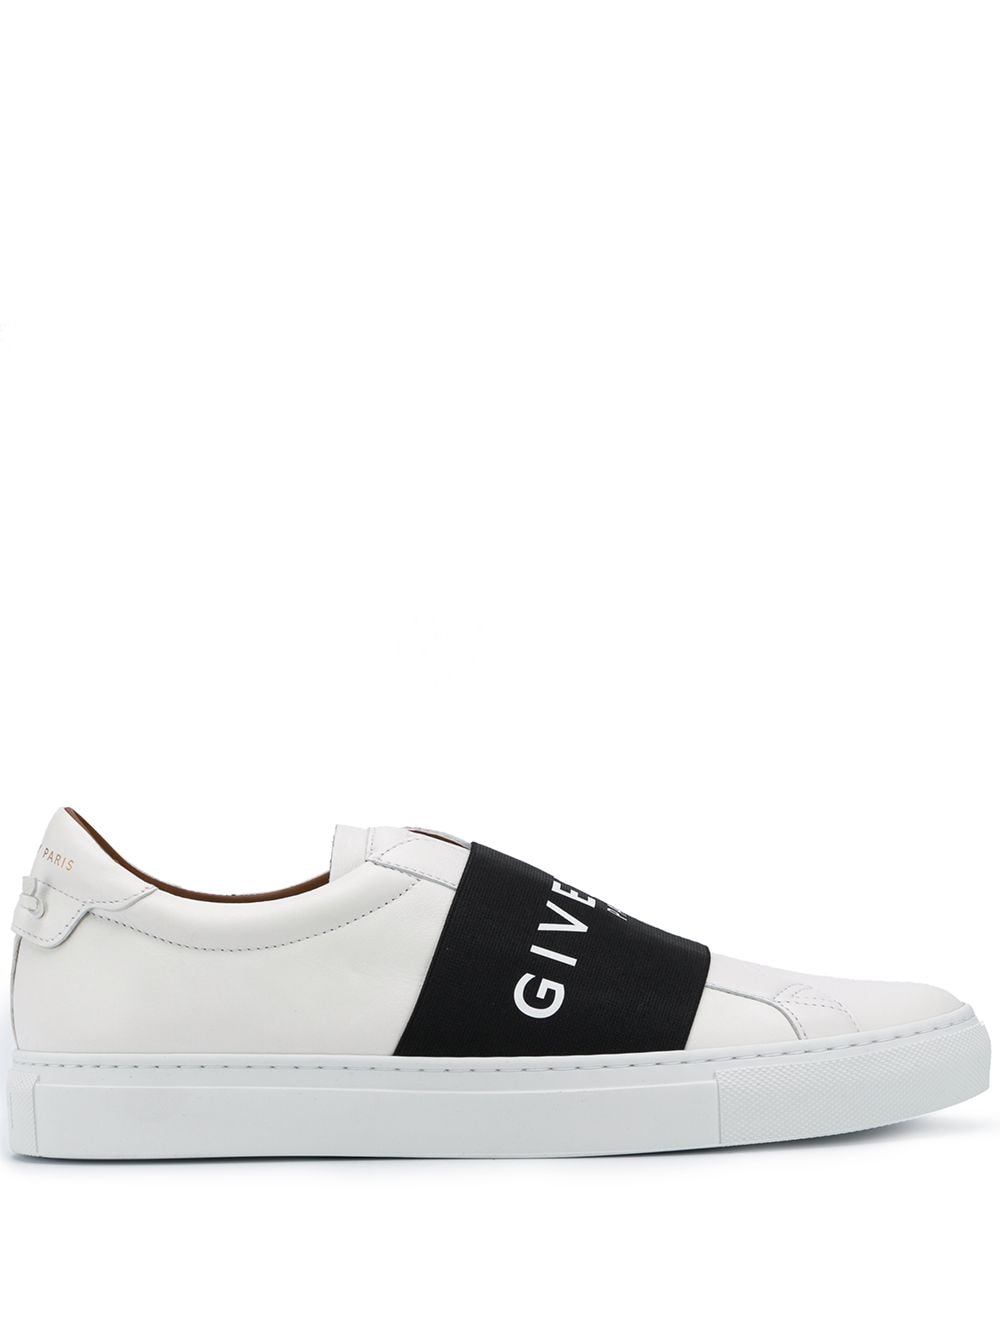 Givenchy Paris low-top Sneakers - Farfetch